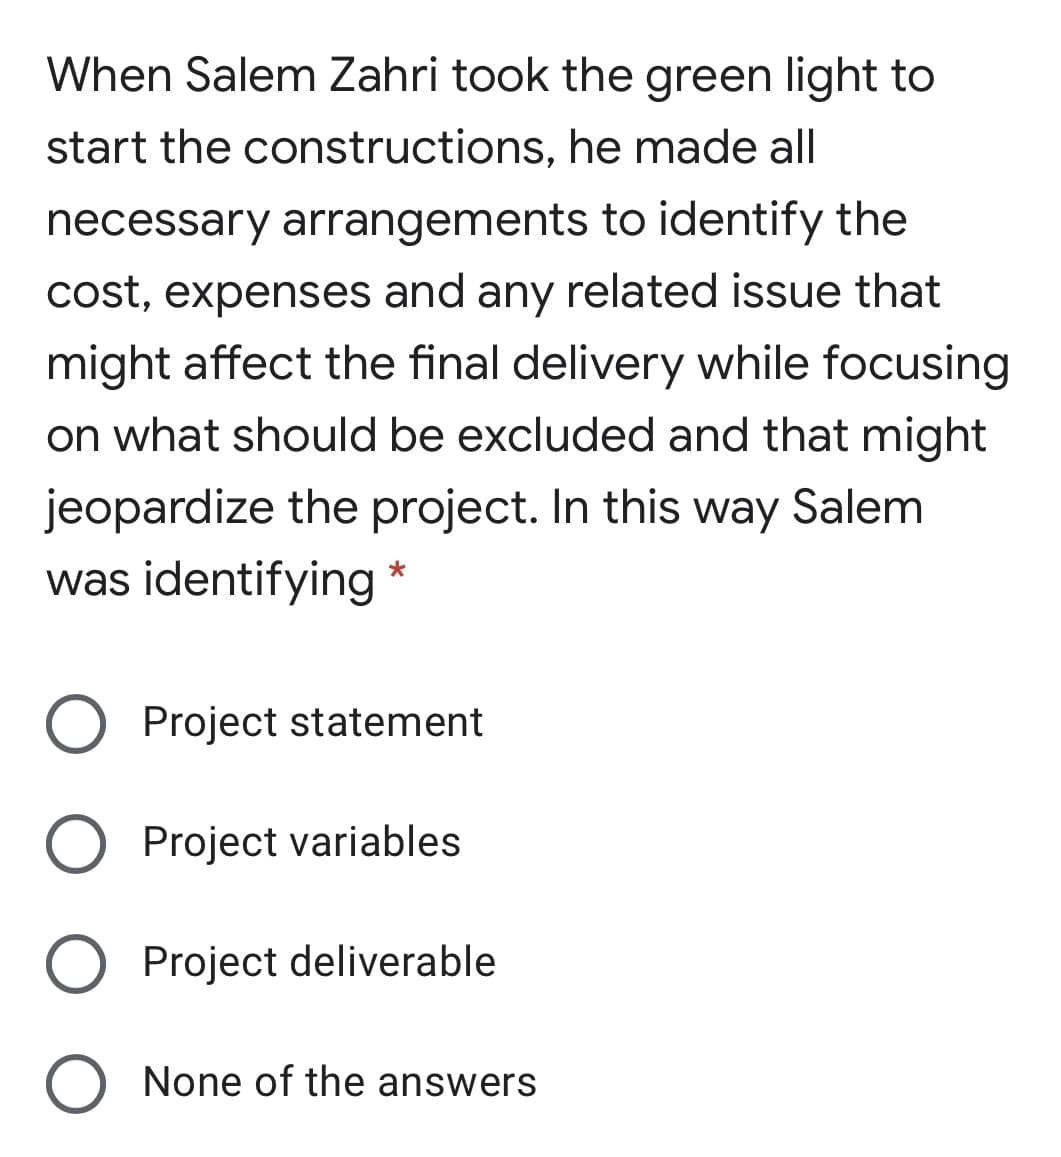 When Salem Zahri took the green light to
start the constructions, he made all
necessary arrangements to identify the
cost, expenses and any related issue that
might affect the final delivery while focusing
on what should be excluded and that might
jeopardize the project. In this way Salem
was identifying *
Project statement
O Project variables
Project deliverable
O None of the answers
